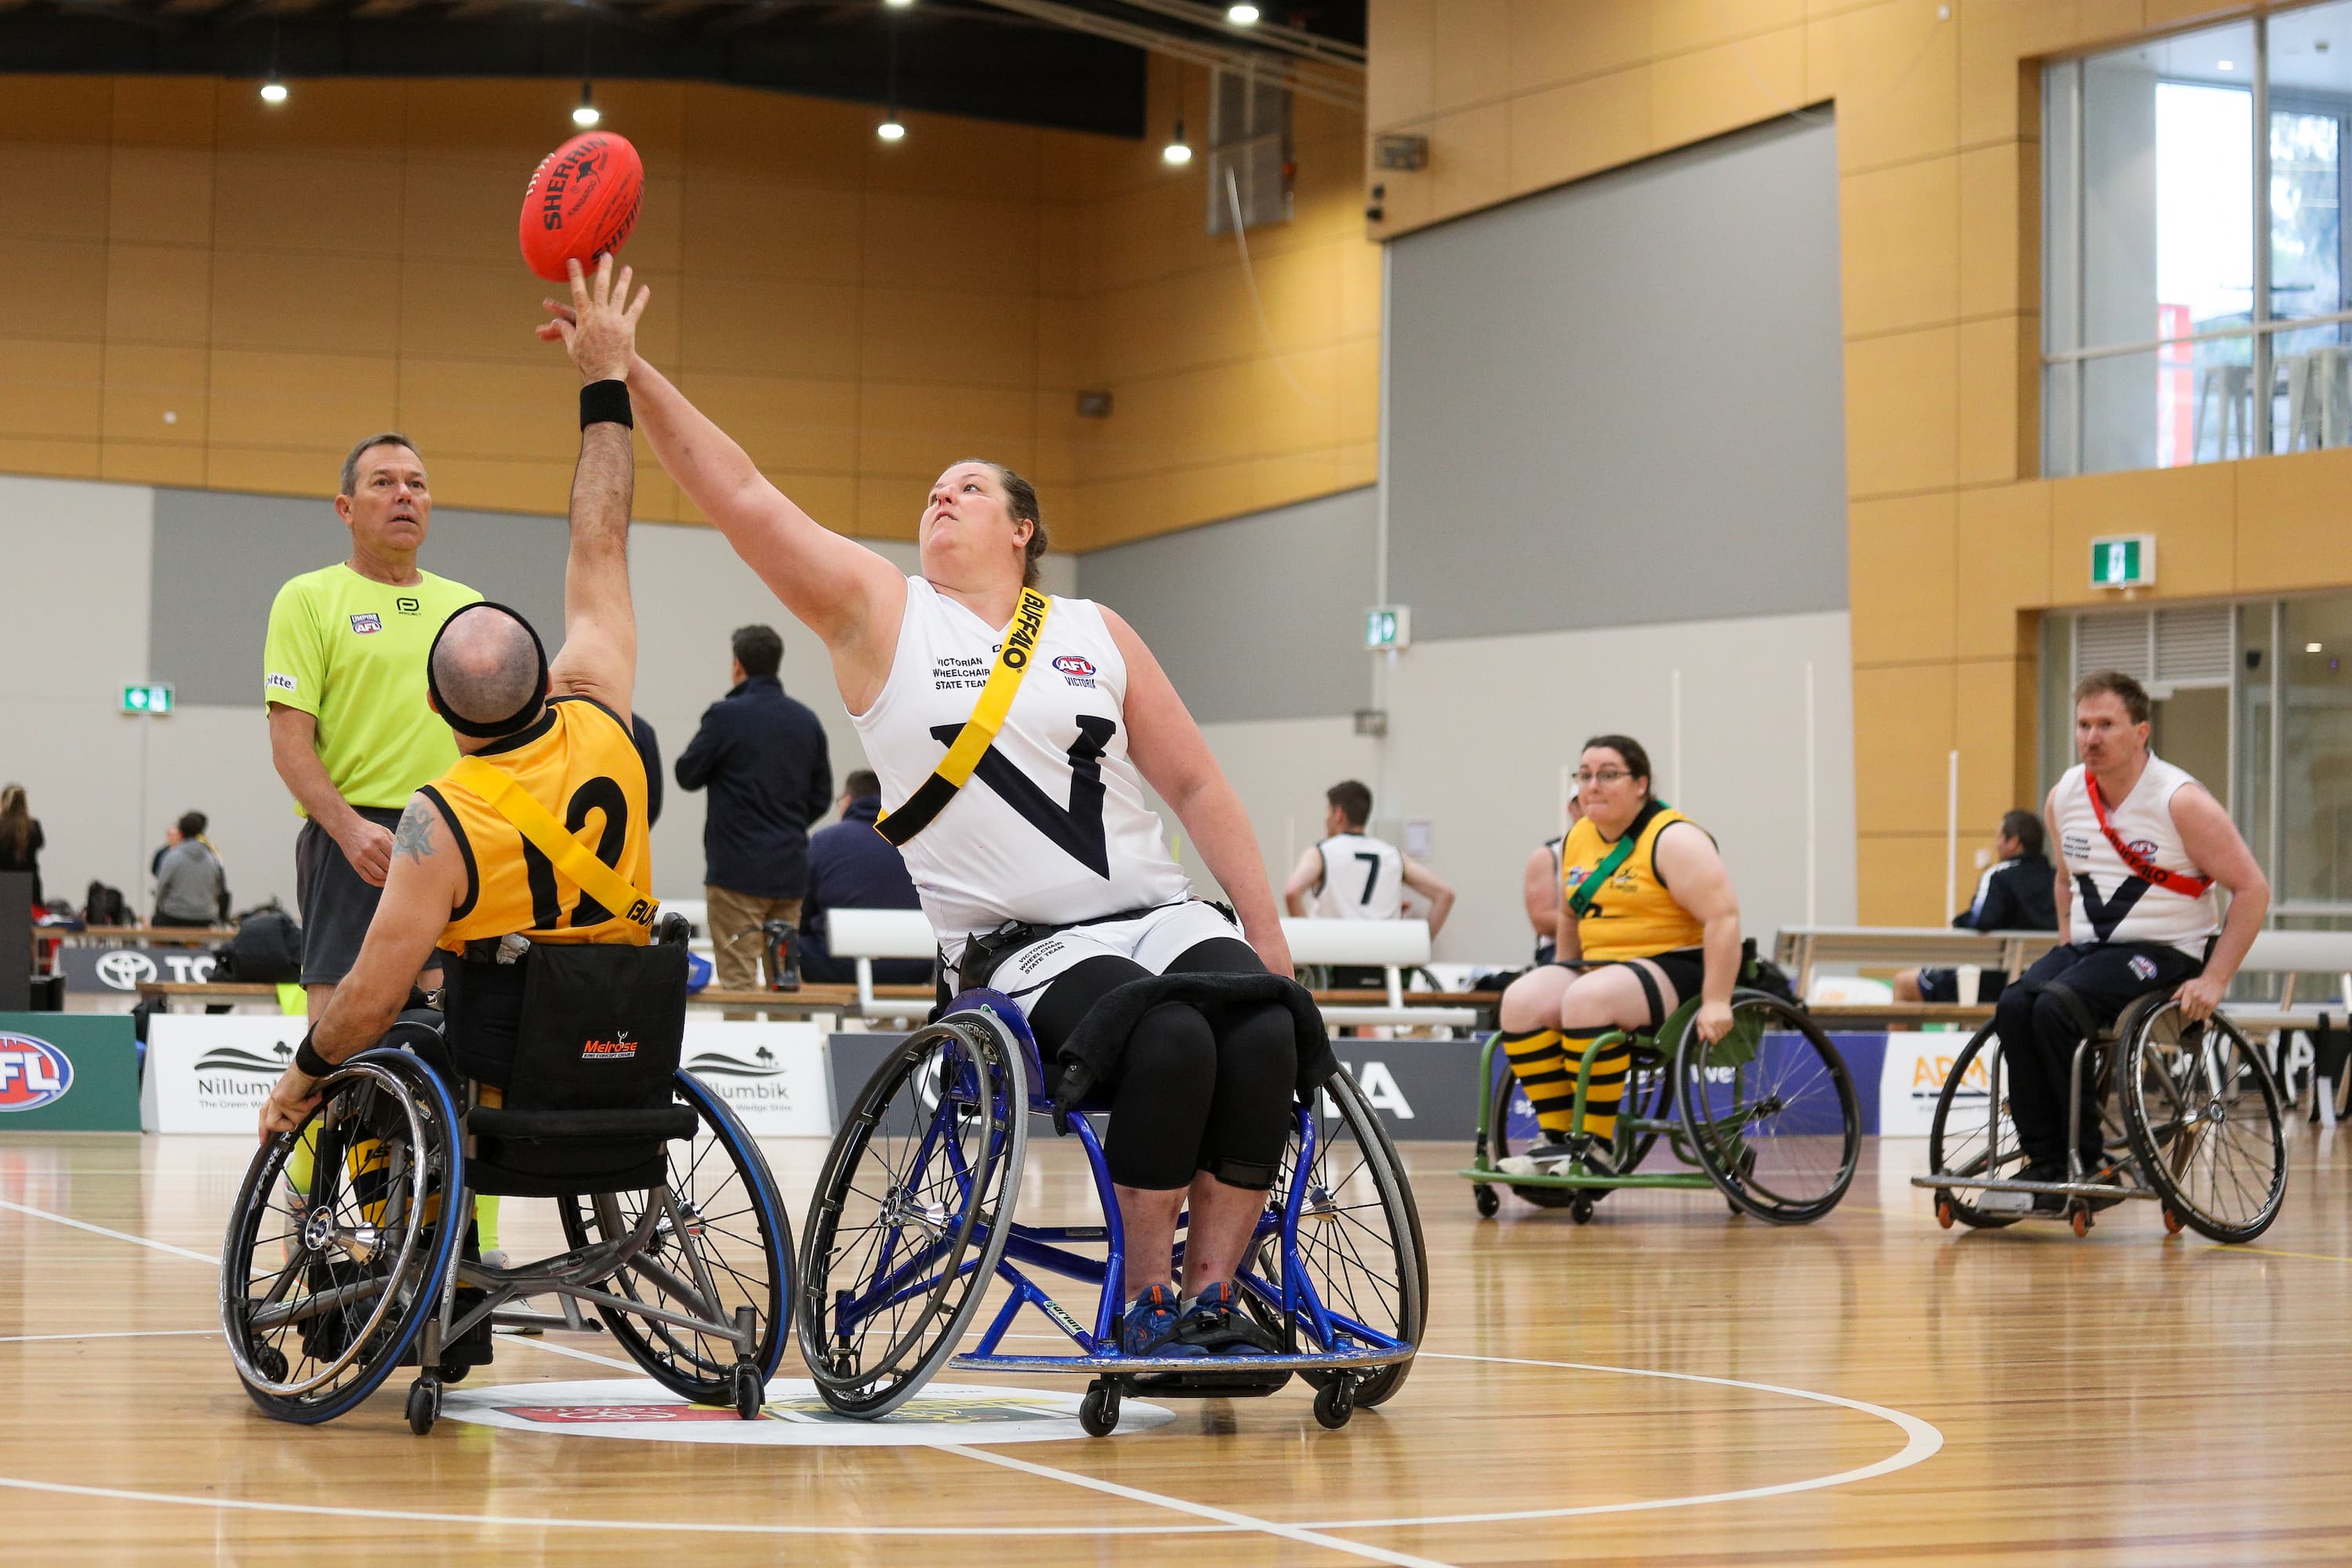 A group of wheelchair AFL players on an indoor court. Two players are reaching up for the football as the referee looks on.